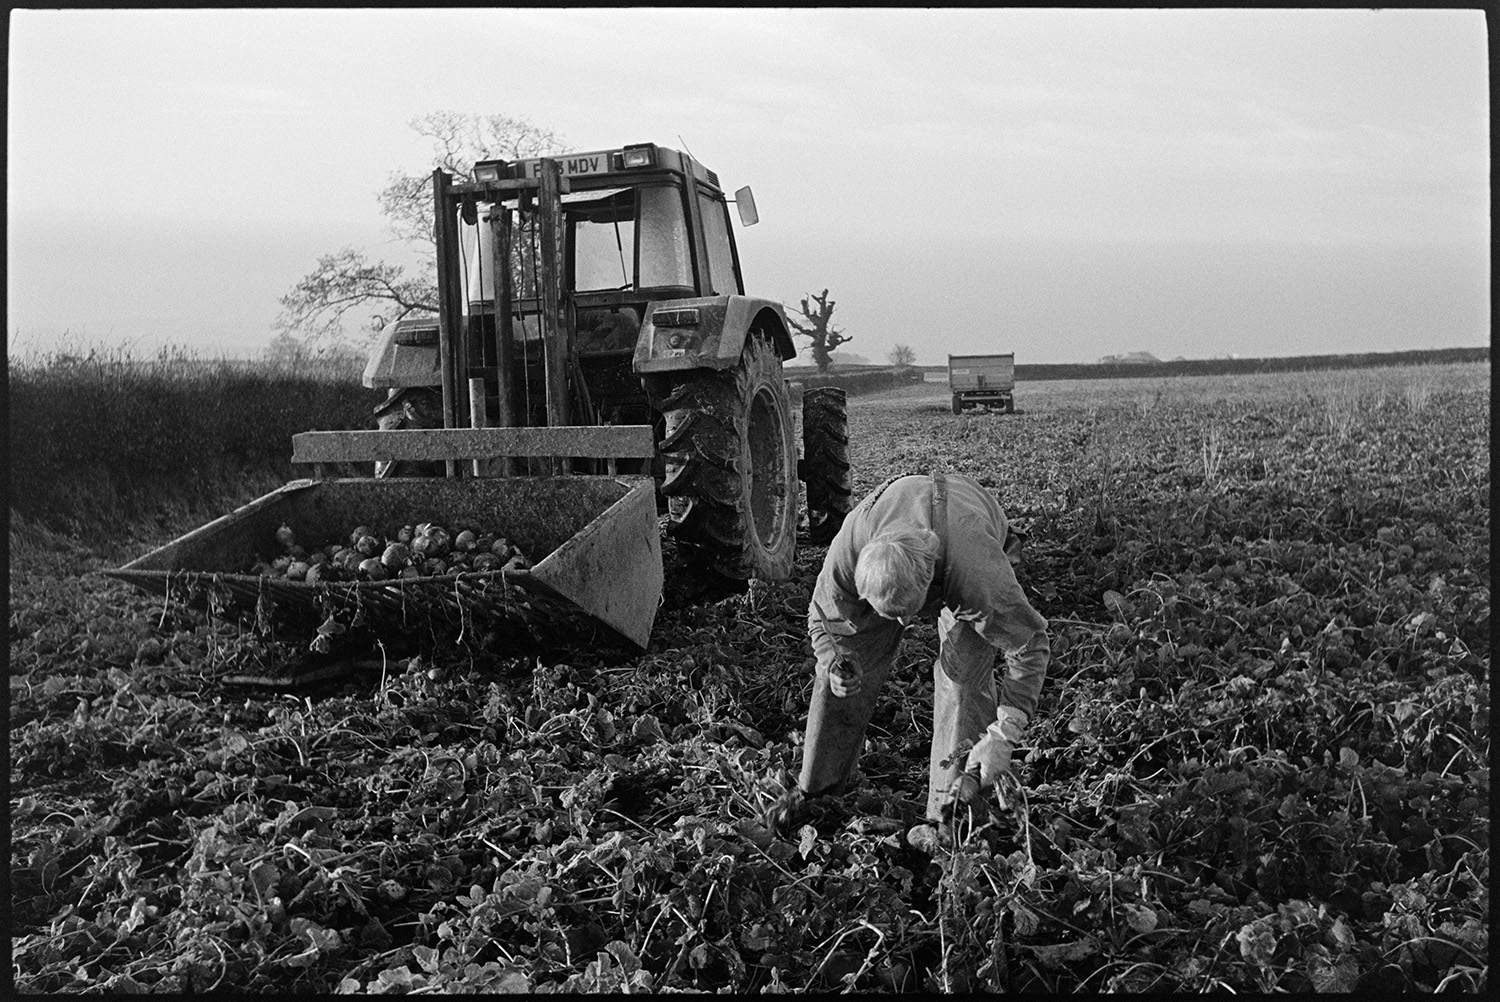 Farmer pulling swedes and loading into link box, tractor. 
[A man lifting swedes by hand with a knife and placing them into a link box attached to a tractor in a field at Parsonage Farm, Chulmleigh. Another trailer can be seen in the field in the background.]